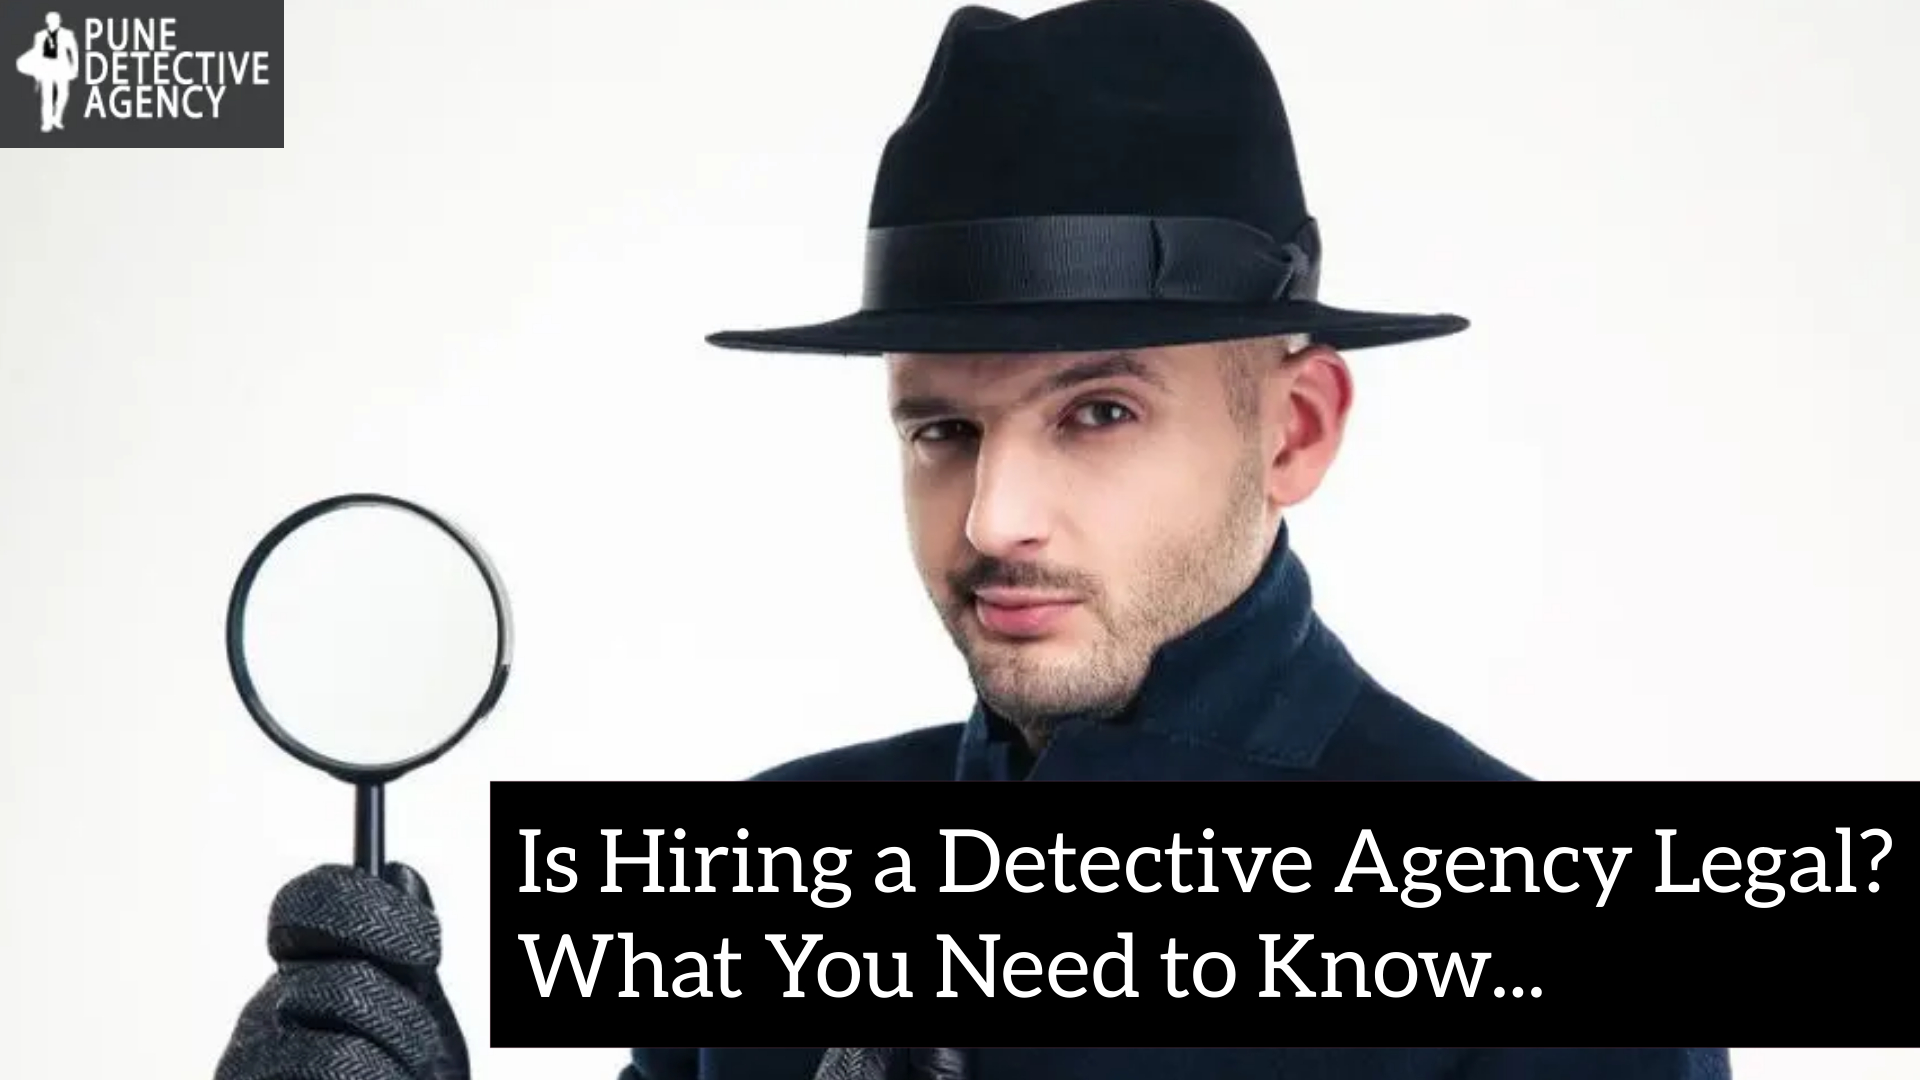 A man wearing a fedora holds a magnifying glass, with the text "Is hiring a detective agency legal? What you need to know about legal considerations..." from the Pune detective agency.